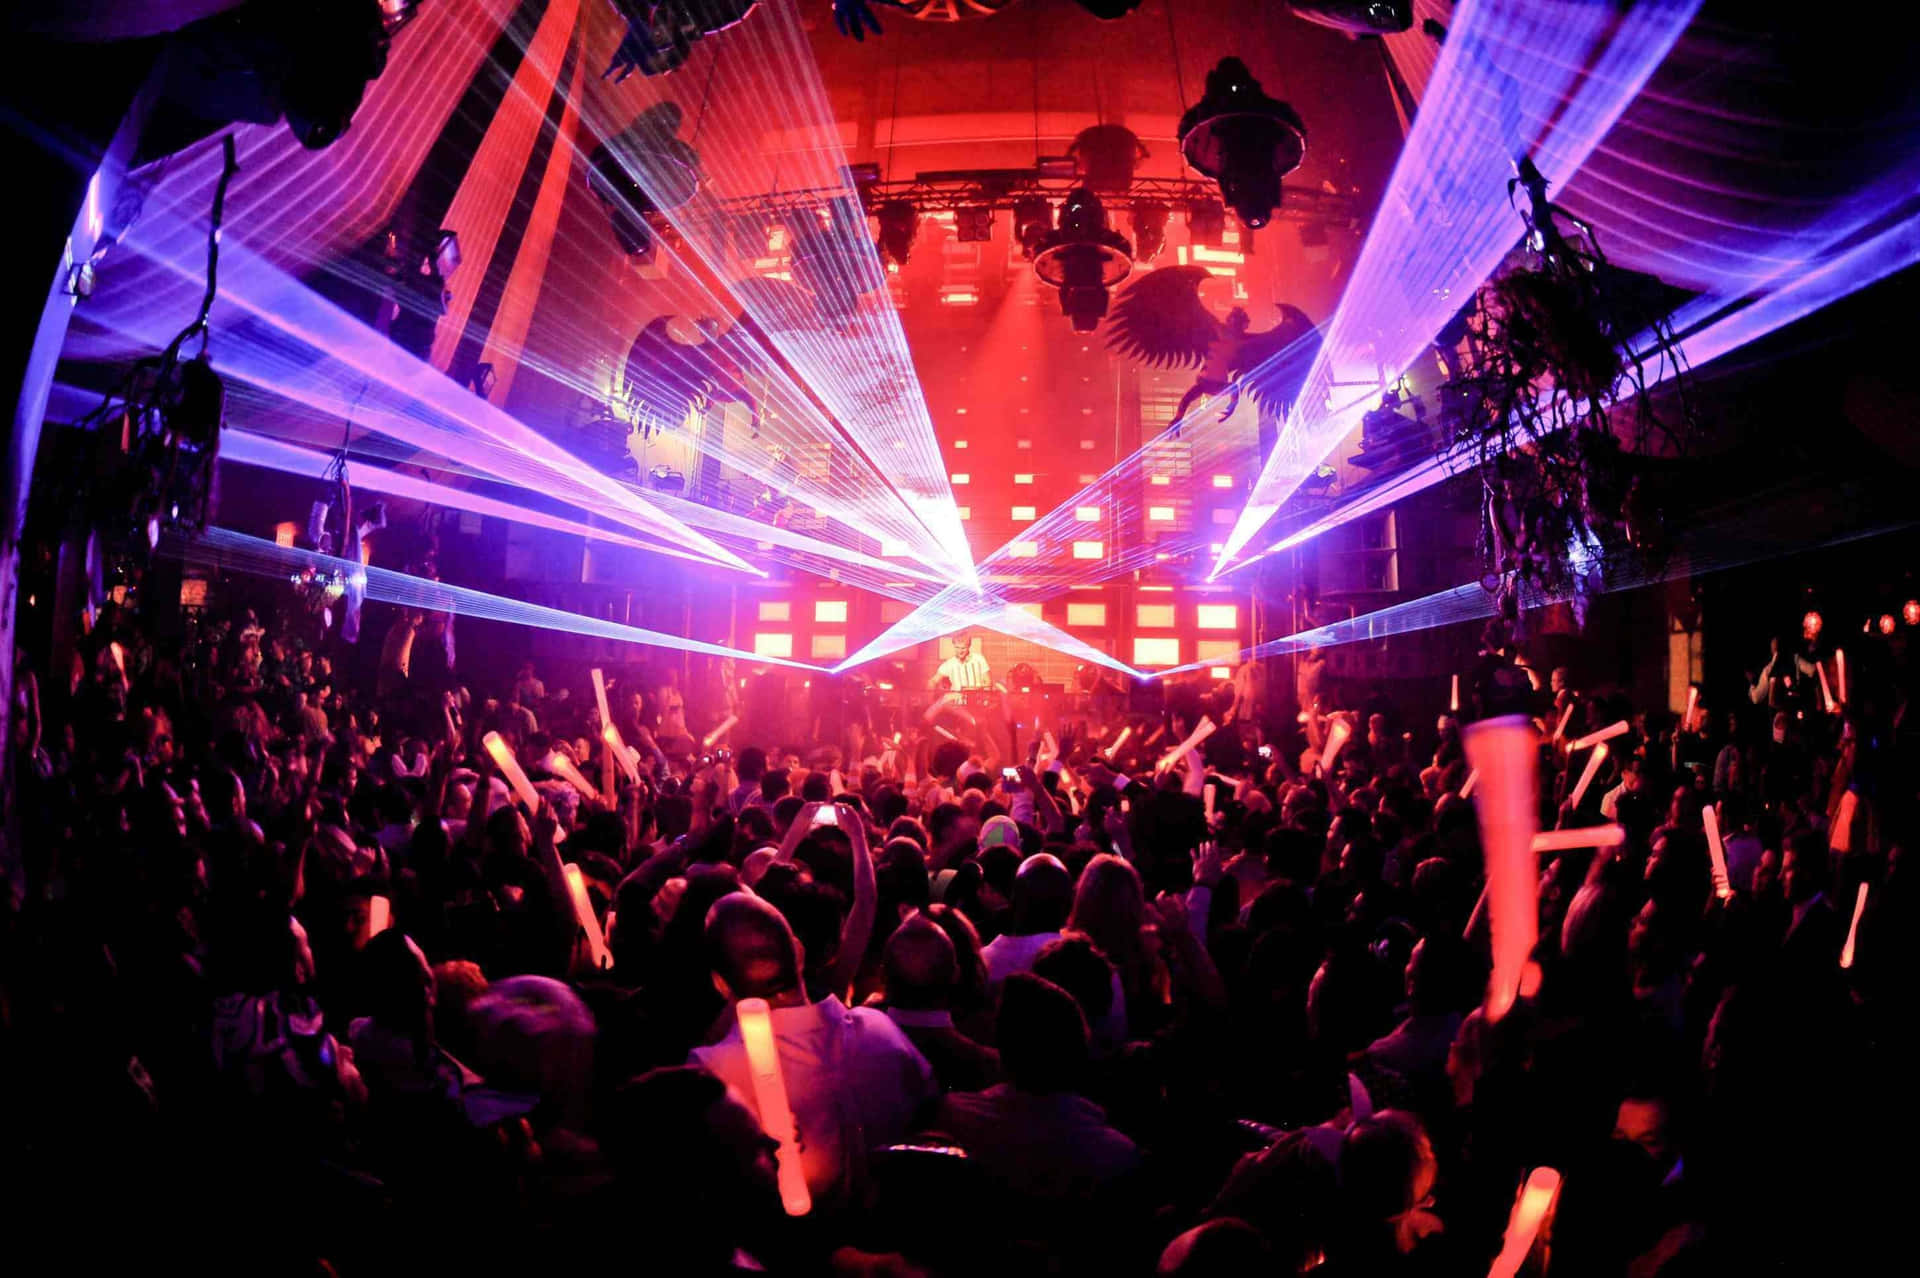 Enjoy life with high energy in a vibrant night club.